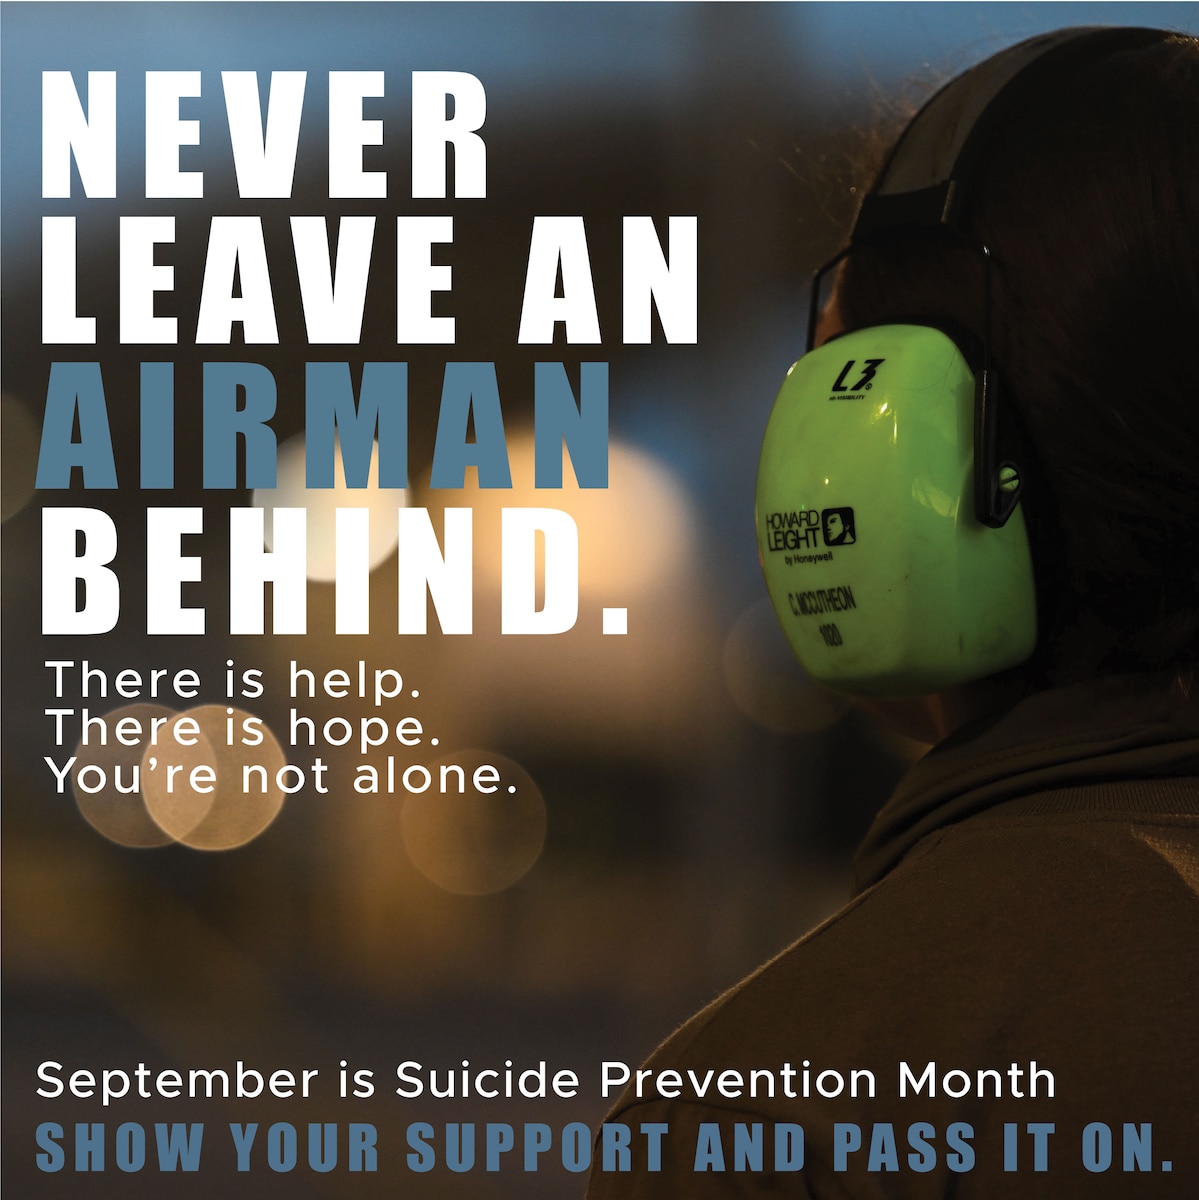 Officials at Hanscom Air Force Base, Mass., are observing Suicide Prevention Month through September to emphasize the importance of connectedness between community members. (Air Force graphic by Airman Colleen Coulthard).